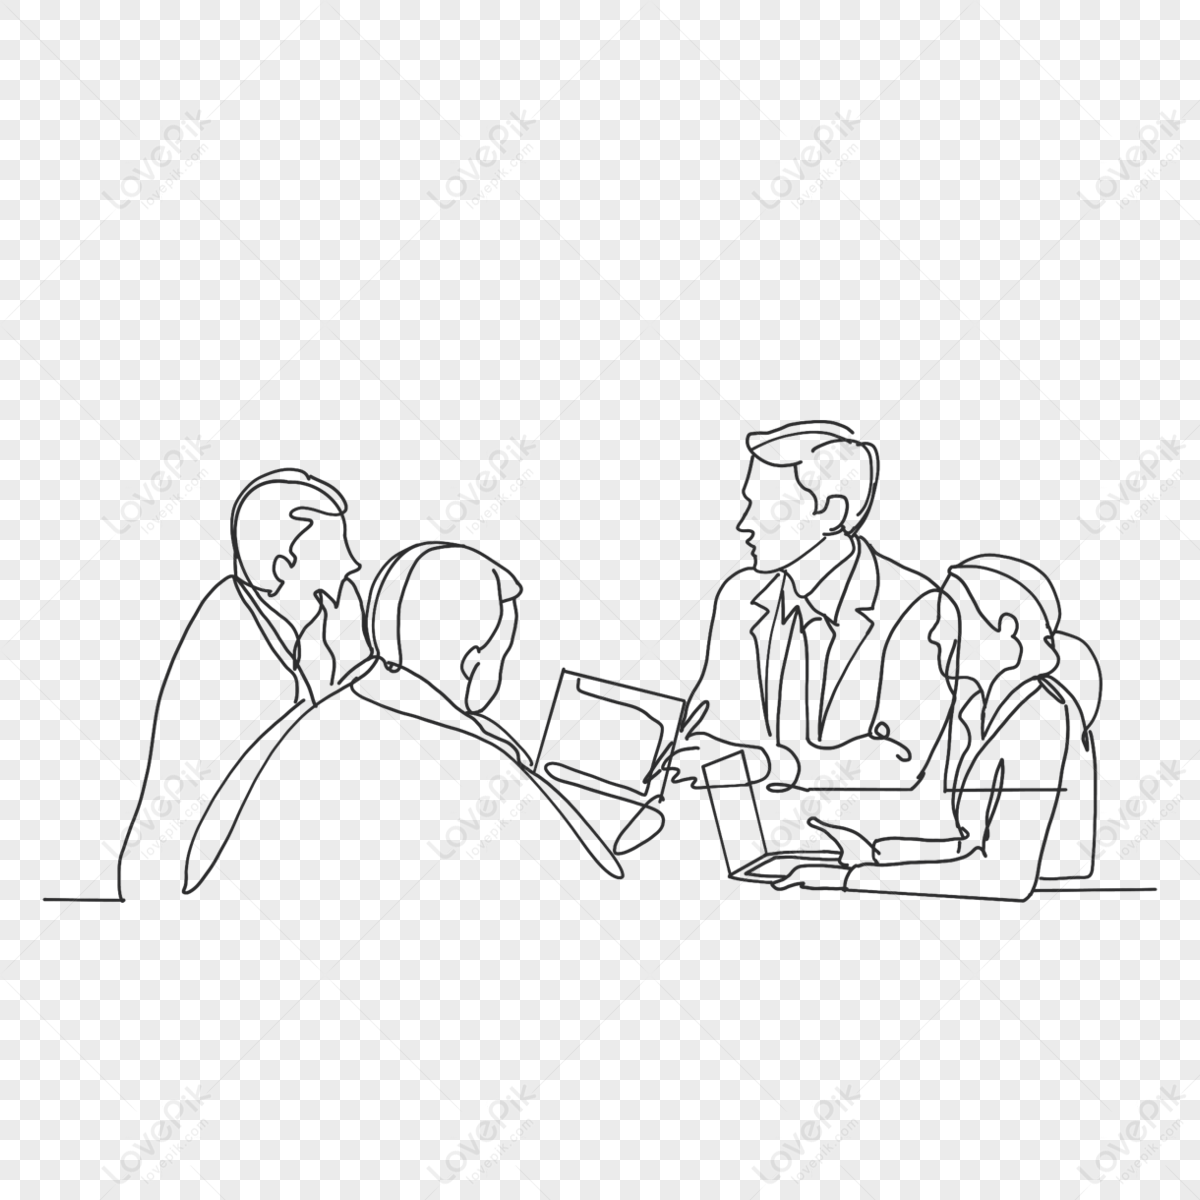 Cartoon business office conversation writing line drawing illustration,hand painted,job png image